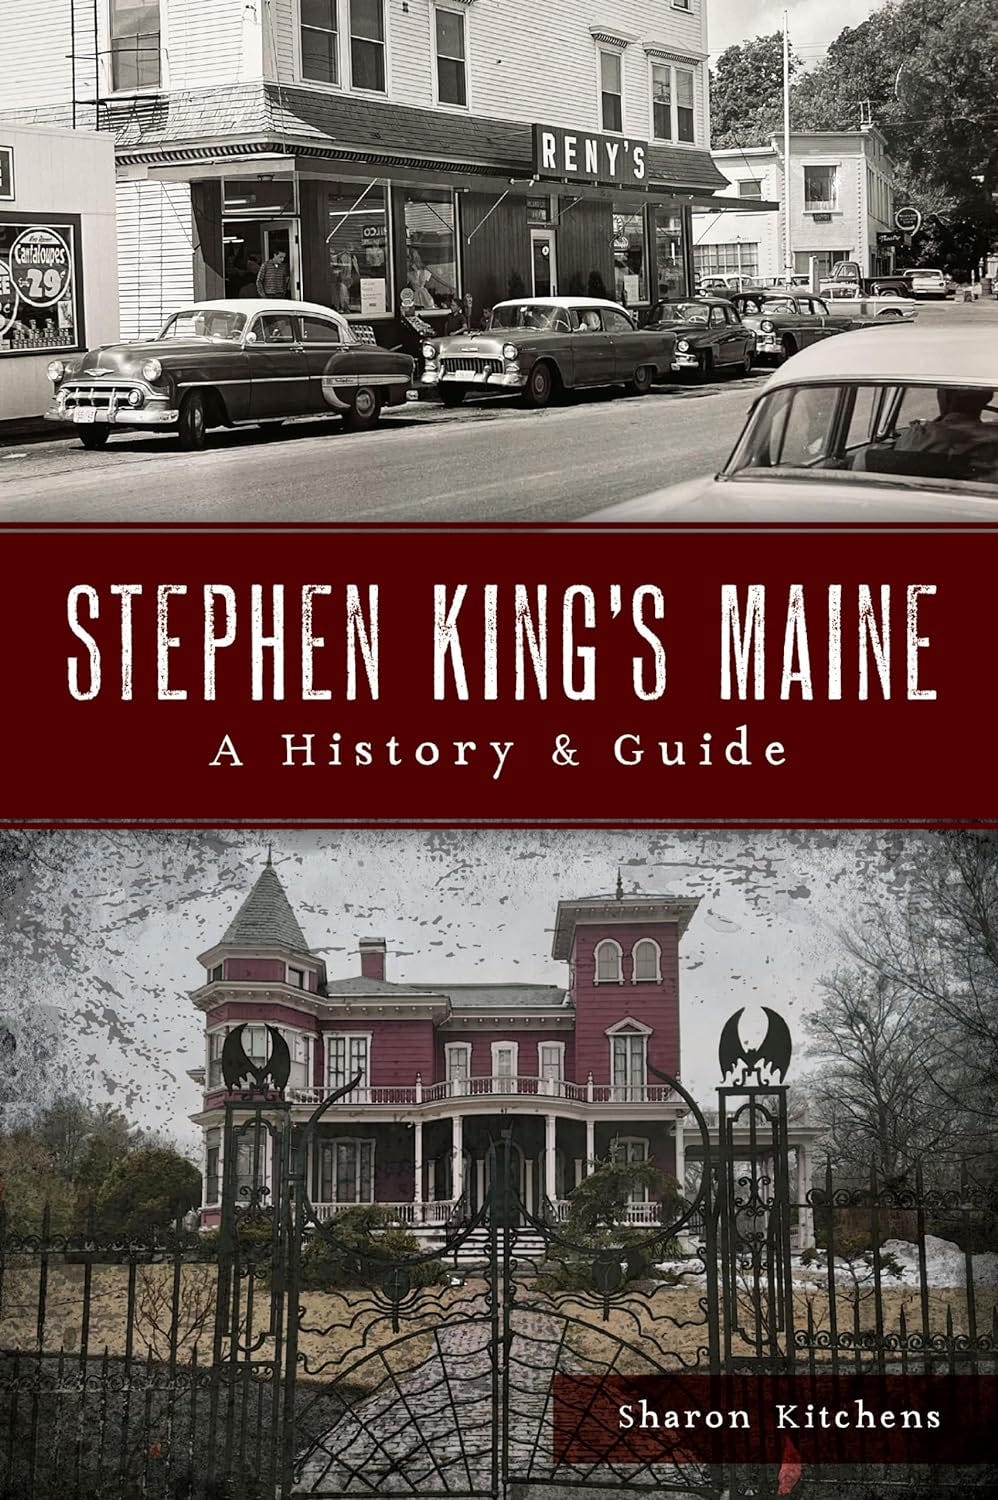 PDF Stephen King's Maine: A History & Guide By Sharon Kitchens